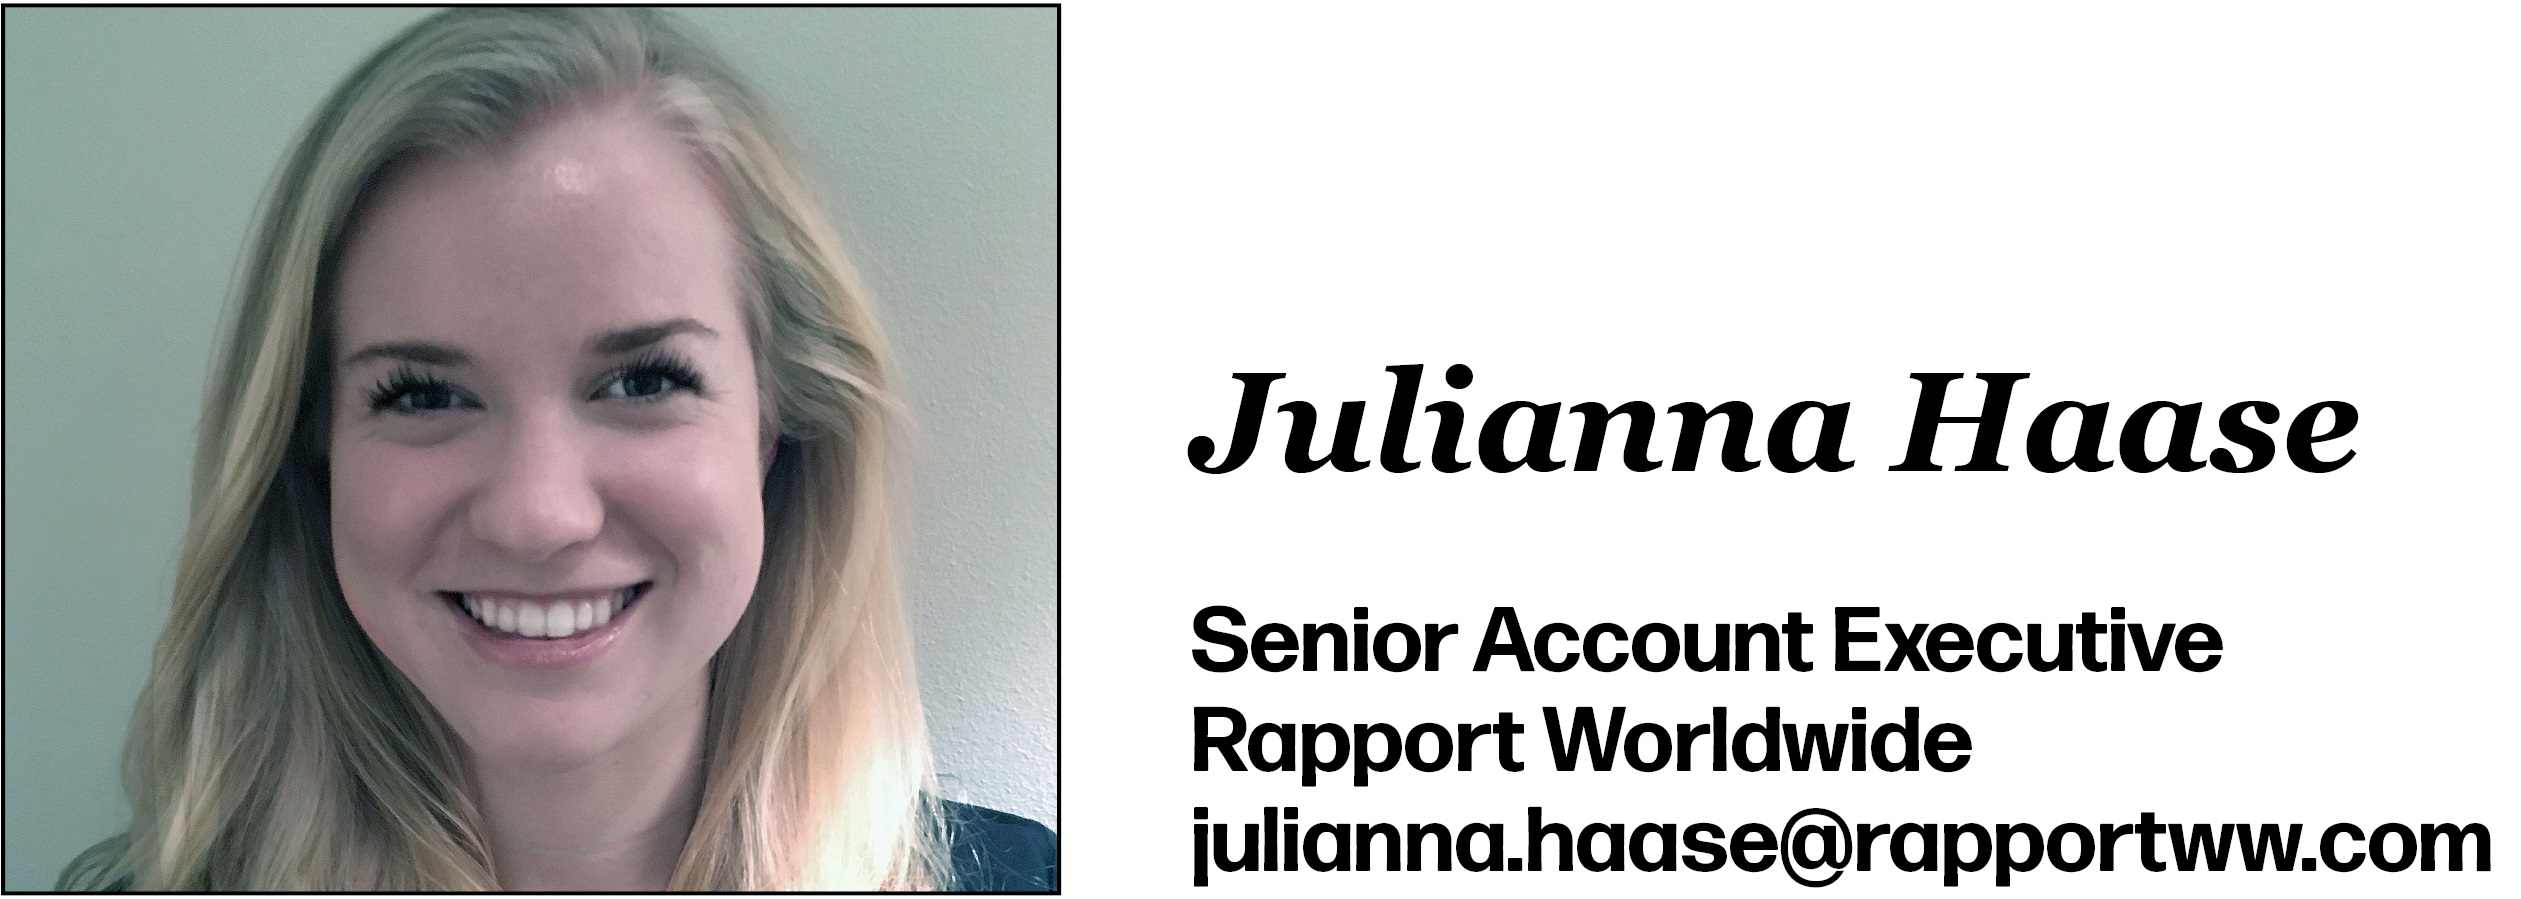 Julianna Haase is Senior Account Executive at Rapport Worldwide. Her email is julianna.haase@rapportww.com.